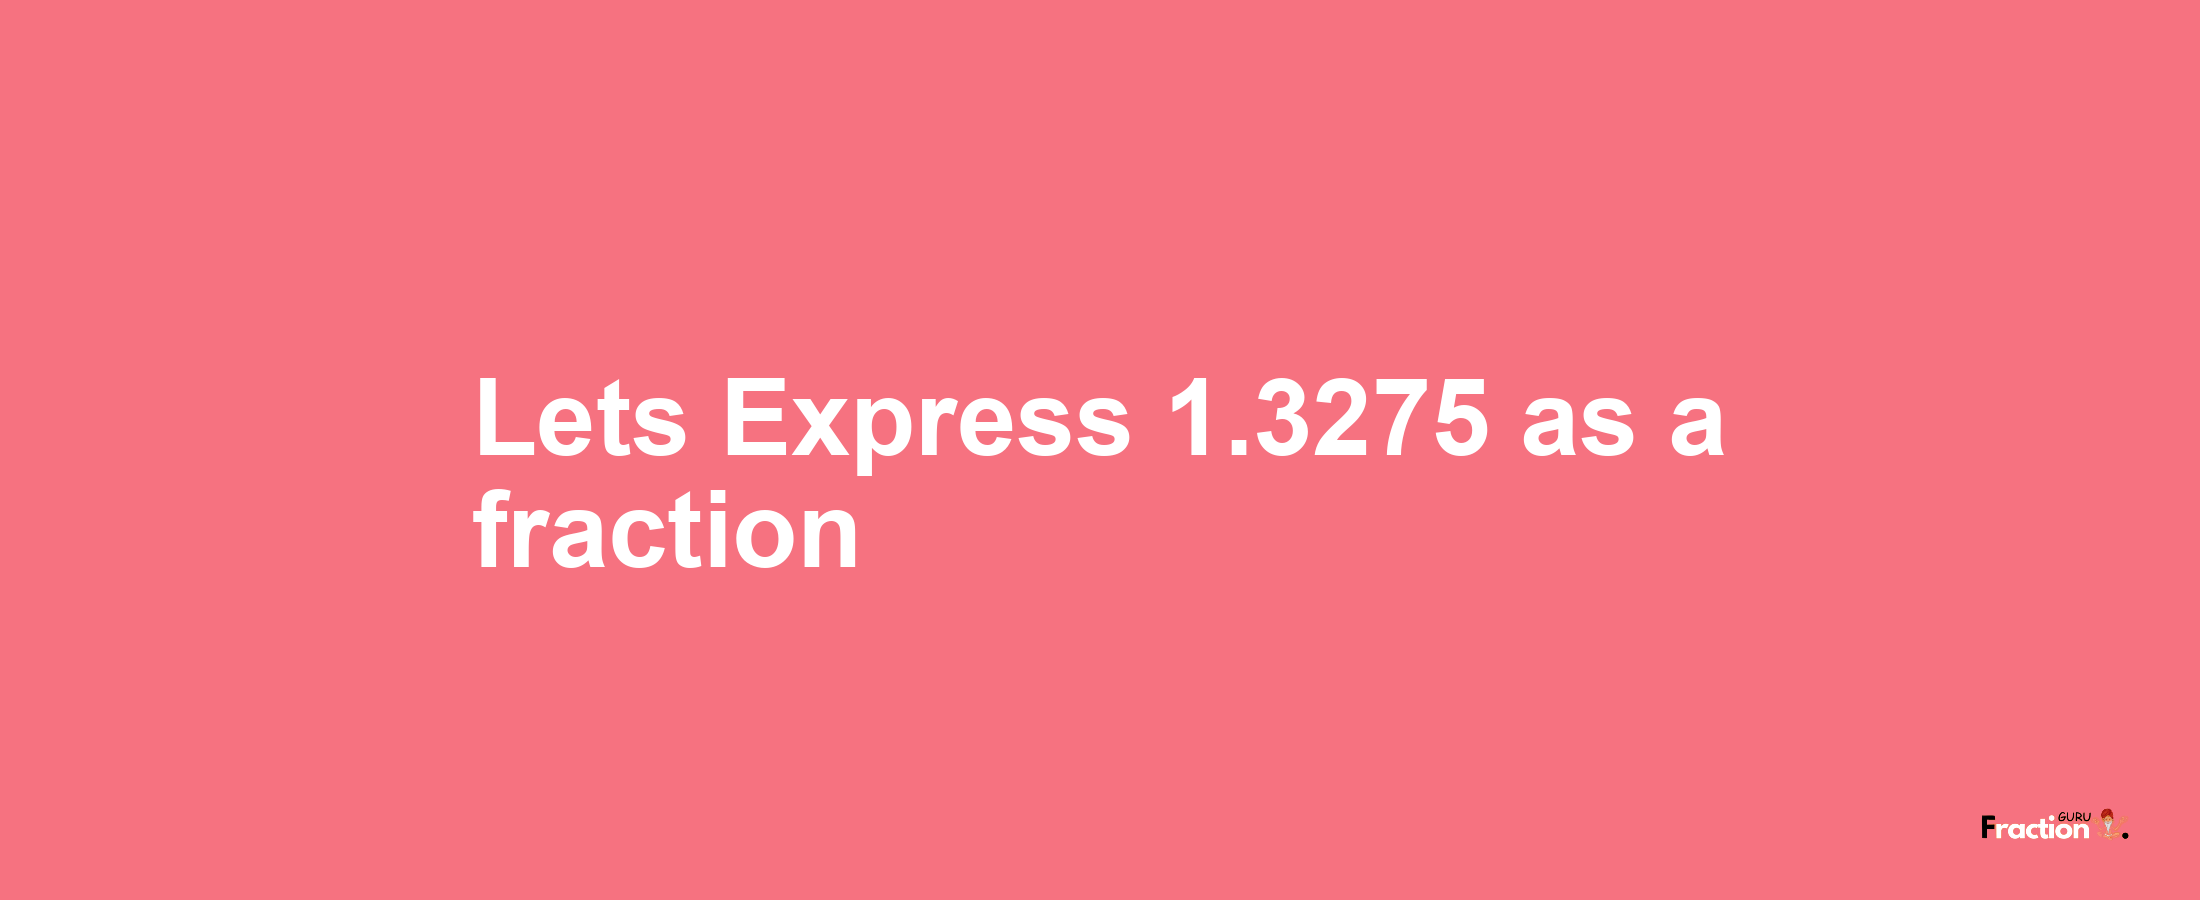 Lets Express 1.3275 as afraction